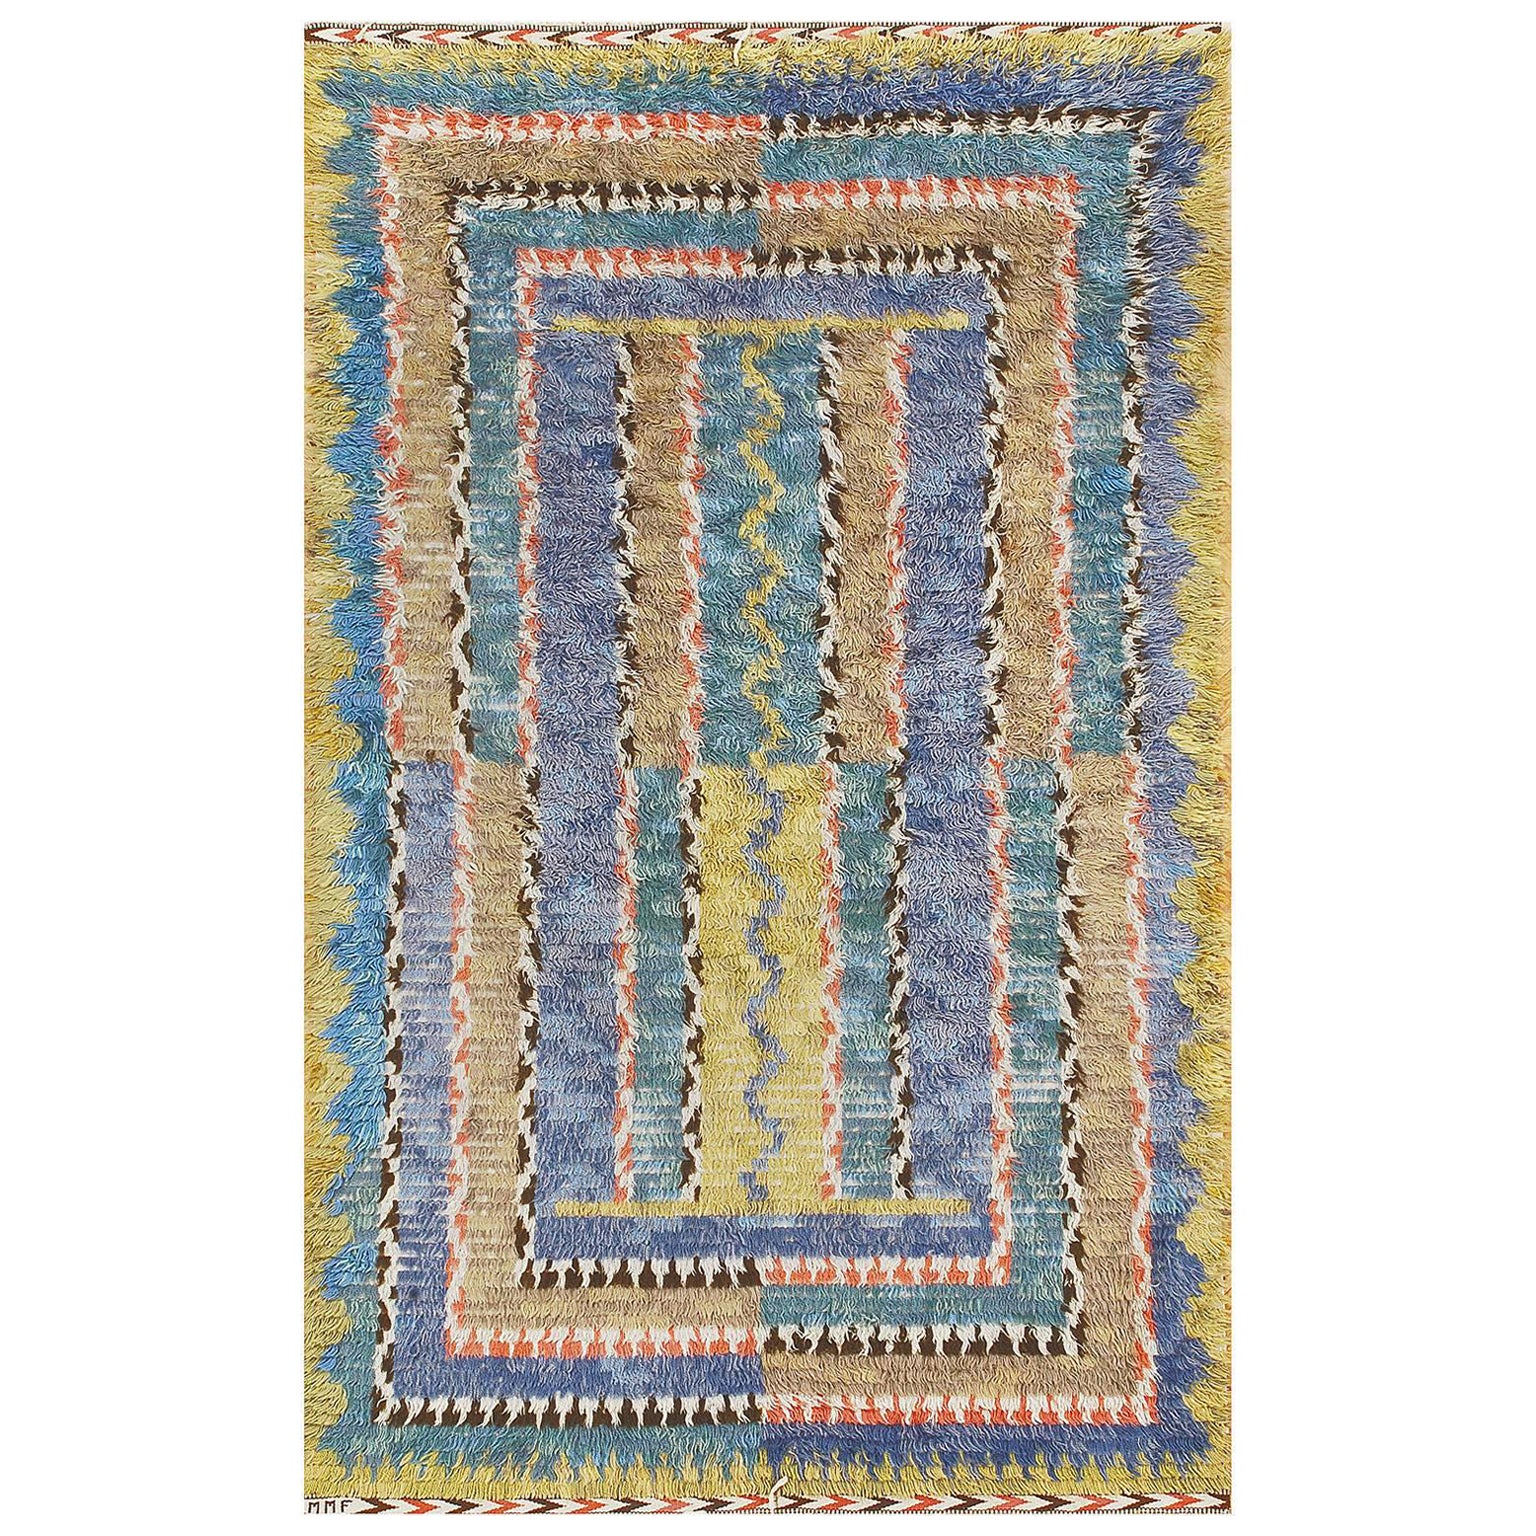 Early 20th Century Marta Maas-Fjetterström Swedish Deco Rug For Sale